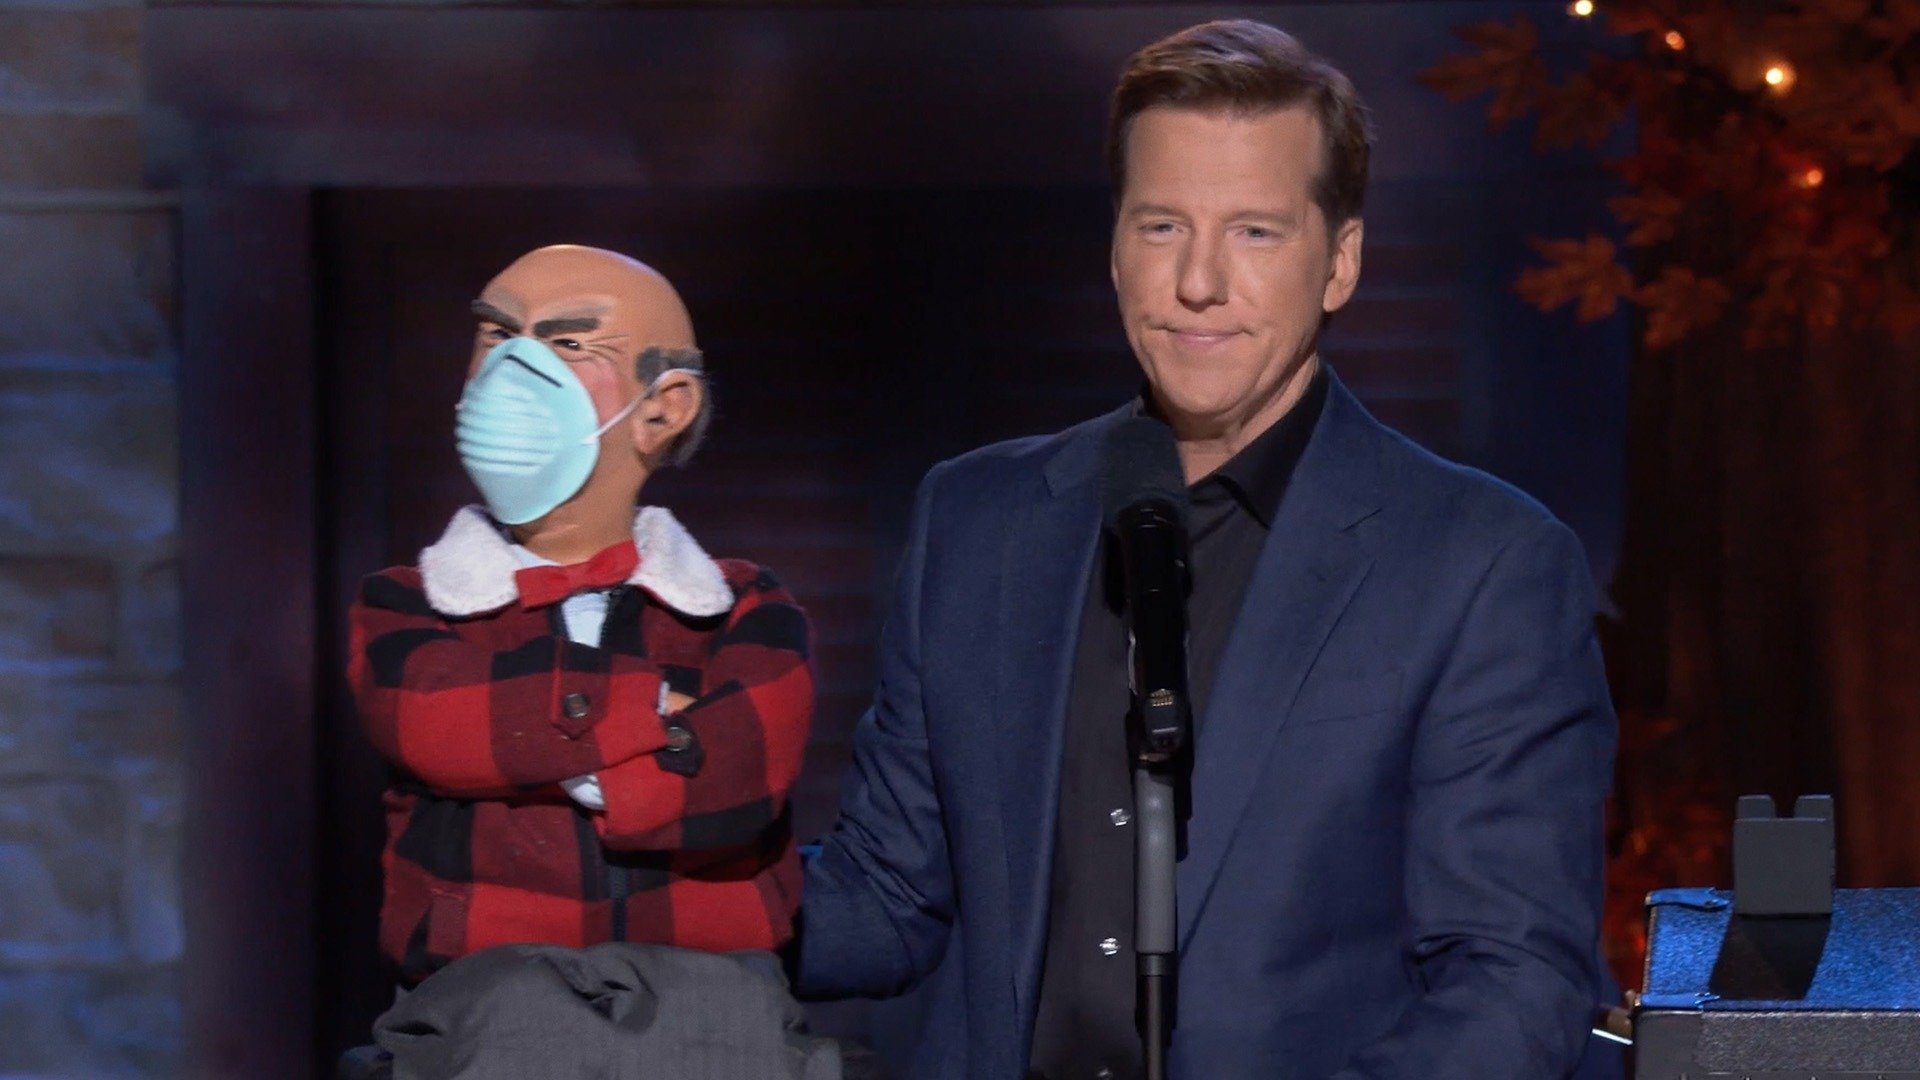 Jeff Dunham's Completely Unrehearsed Last Minute Pandemic Holiday Special